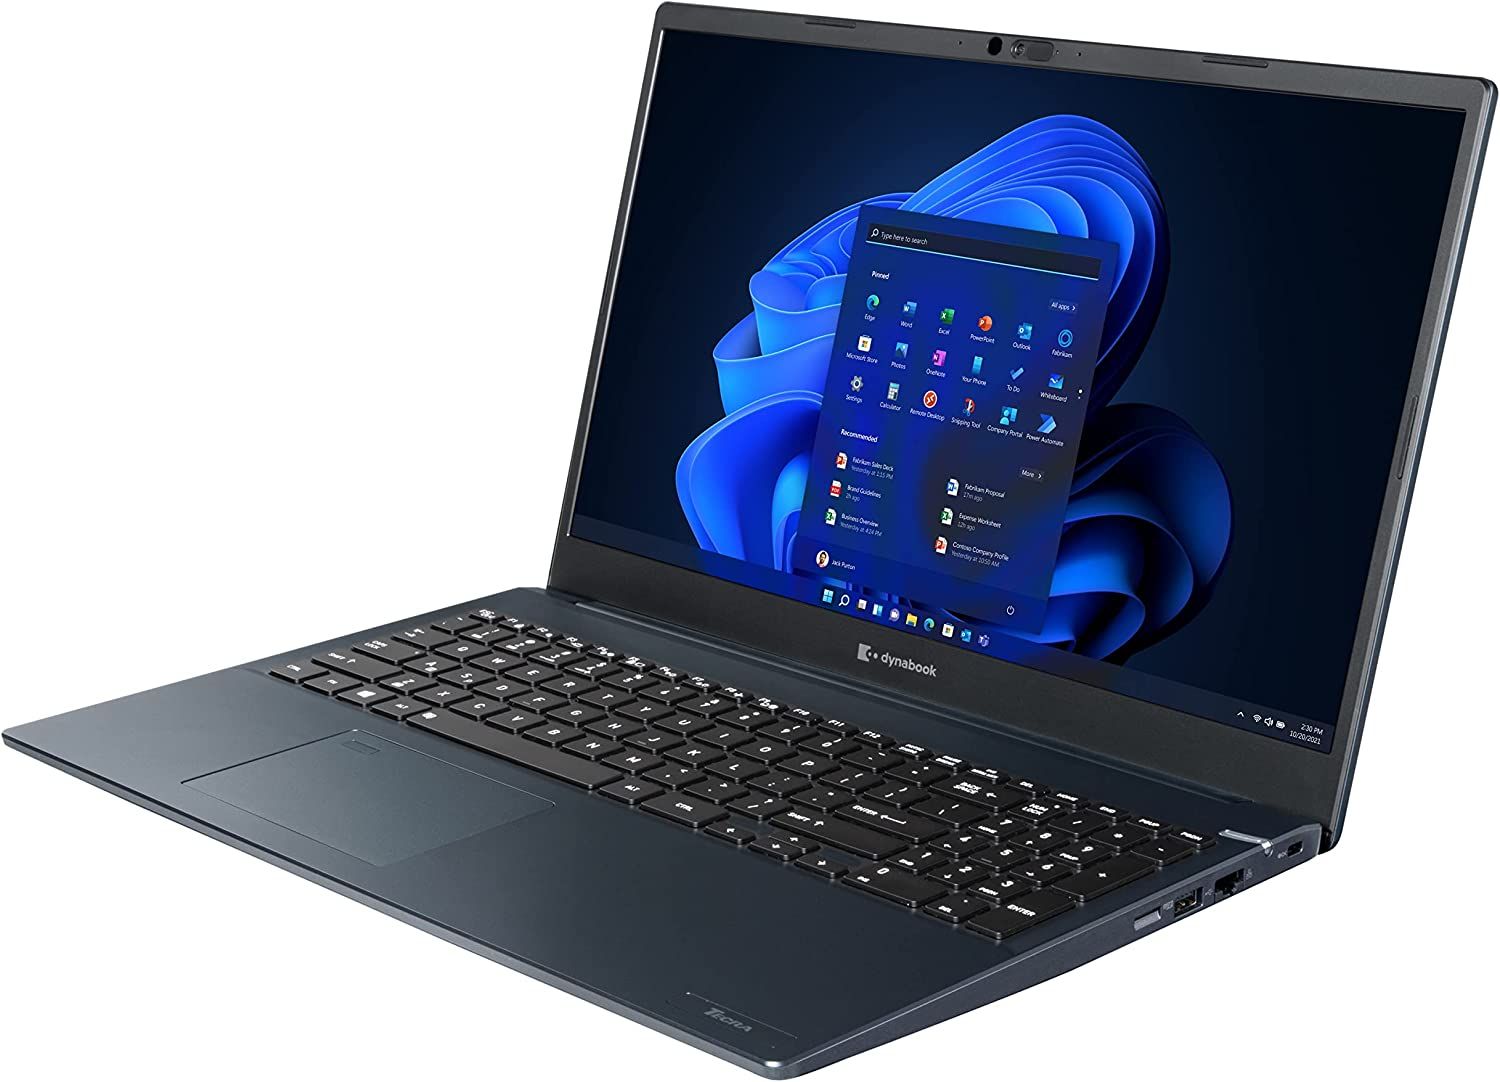 Angled front view of the Dynabook Tecra A50 laptop with the lid open at 100 degrees